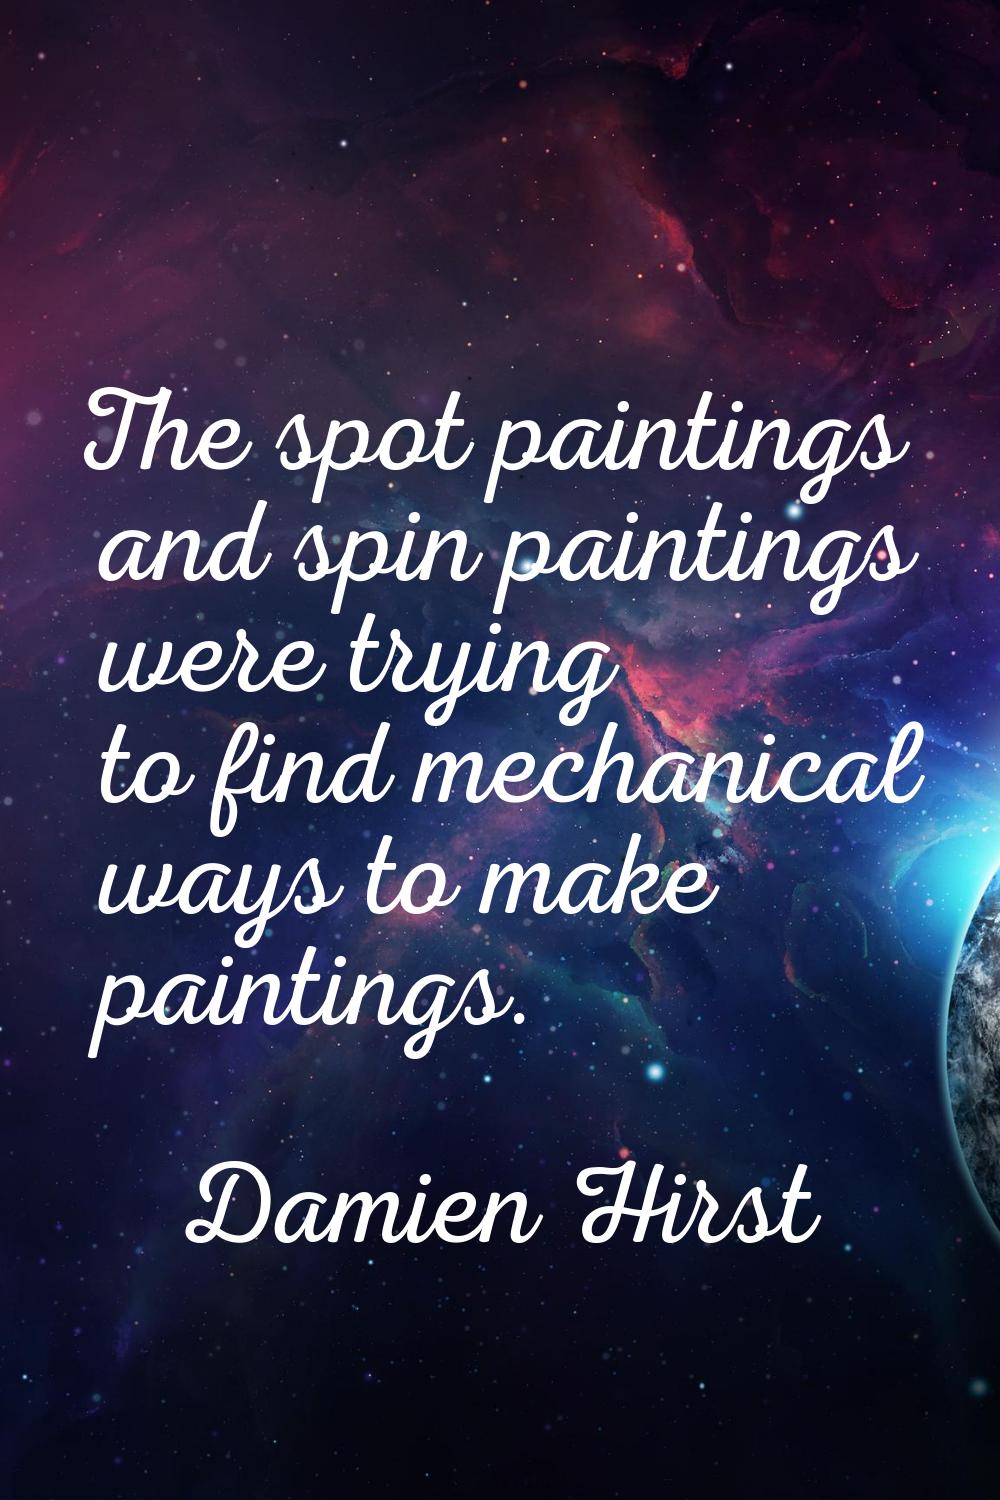 The spot paintings and spin paintings were trying to find mechanical ways to make paintings.